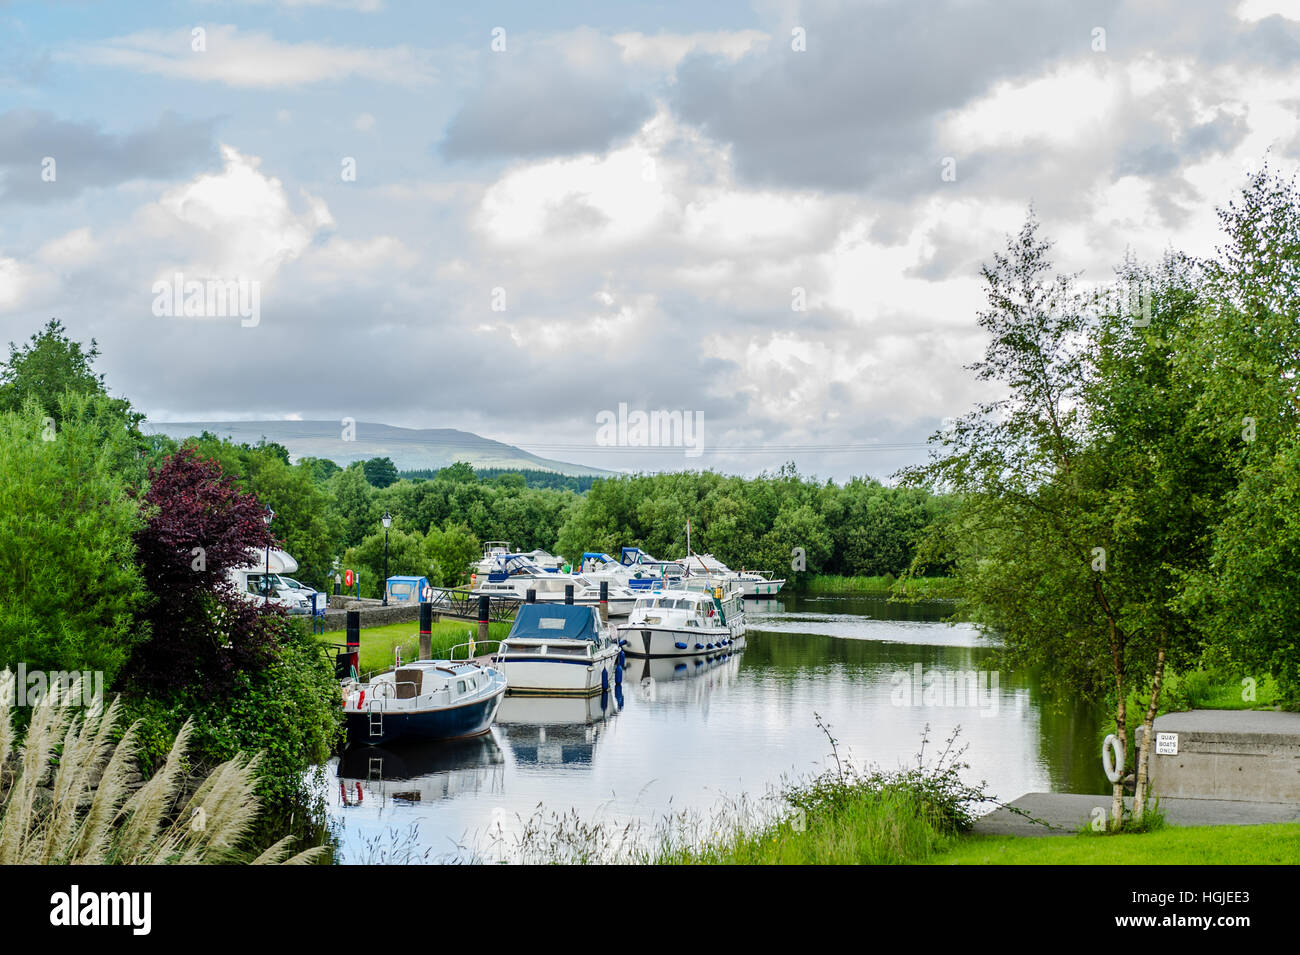 Boats moored on a canal in County Leitrim, Ireland. Stock Photo